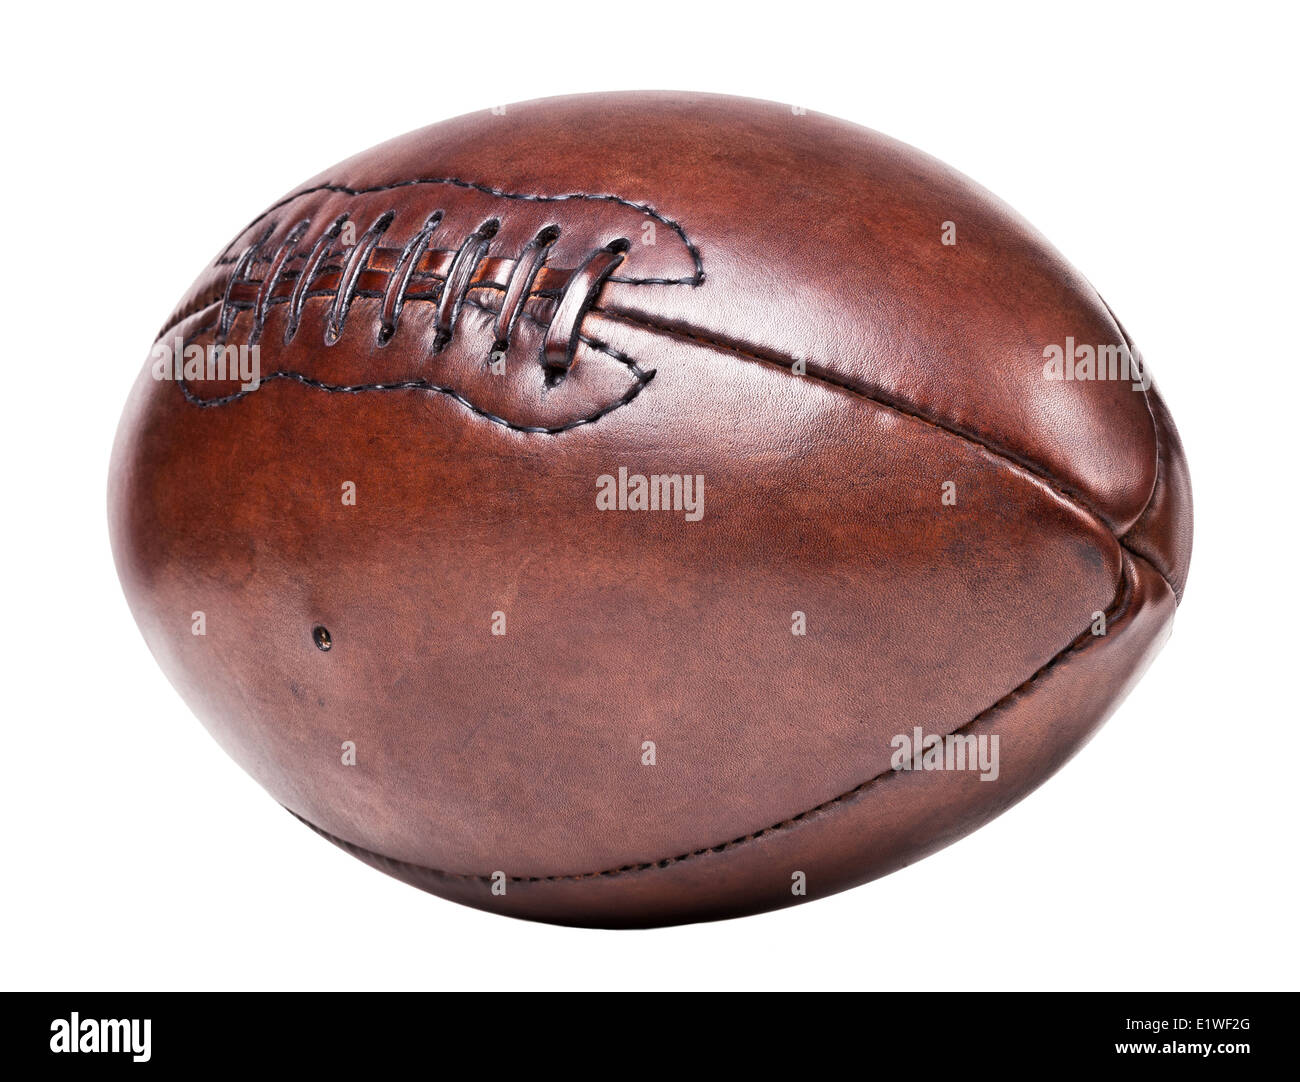 classic-old-leather-football-background-E1WF2G.jpg